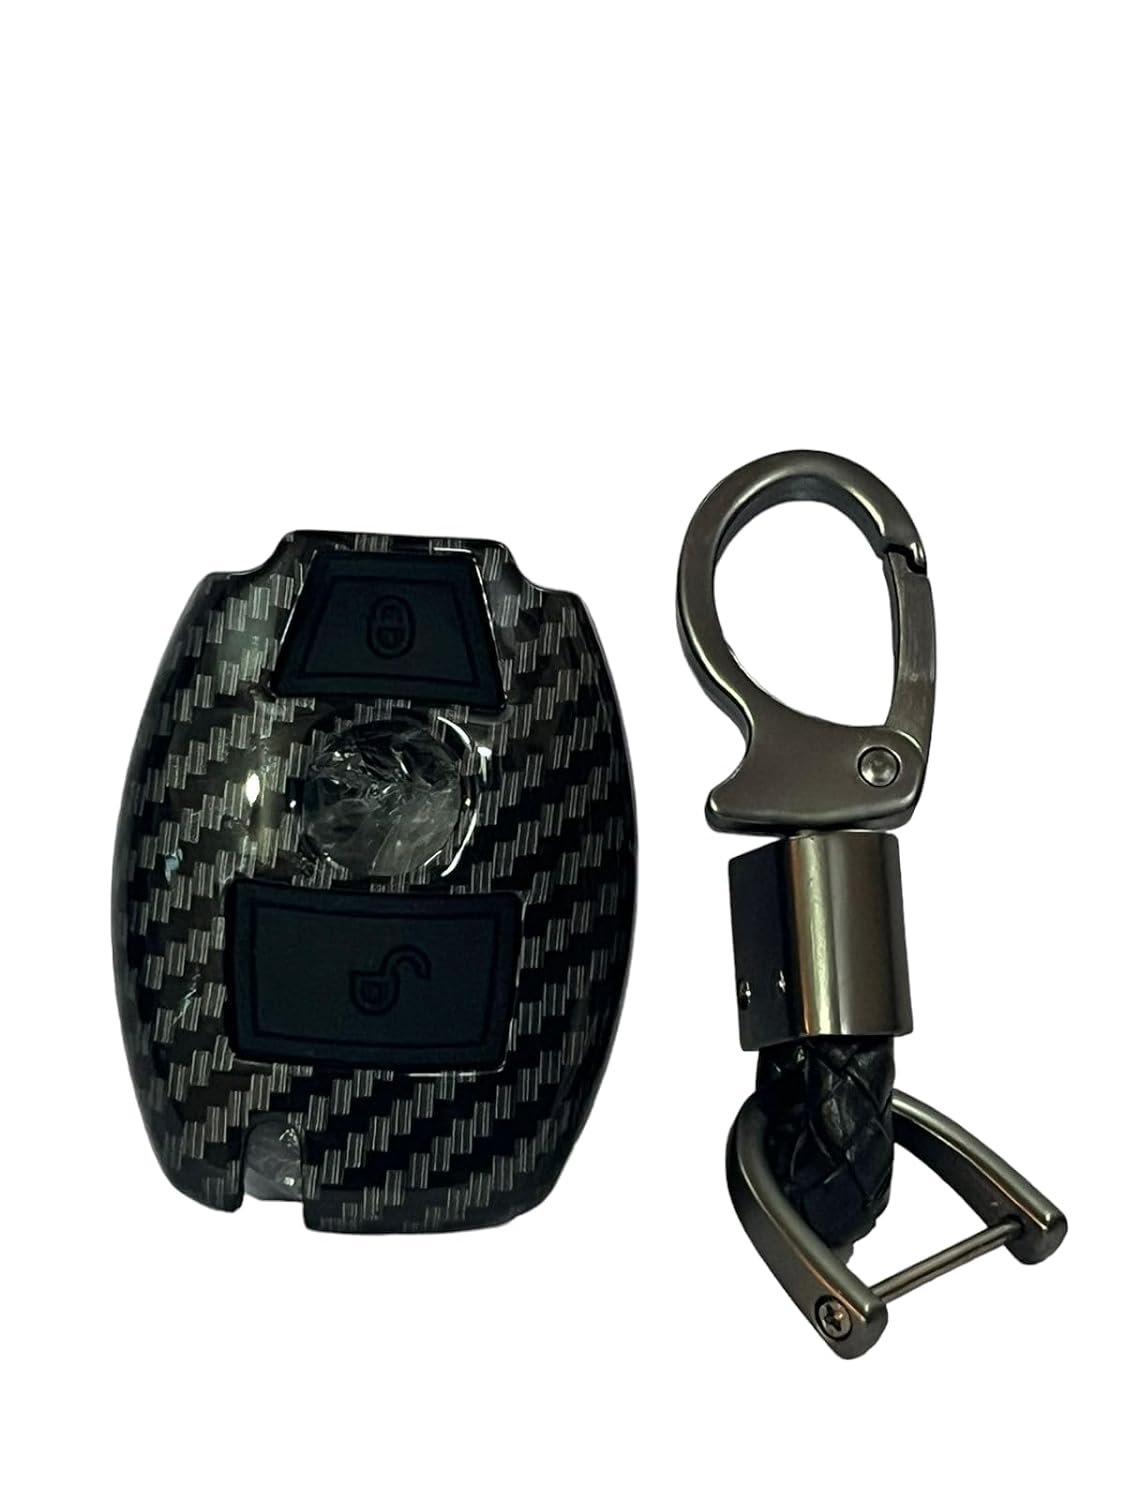 Carbon Fiber ABS Car Key Cover Compatible with Mercedes Benz Smart Key (Key Chain Included) Image 